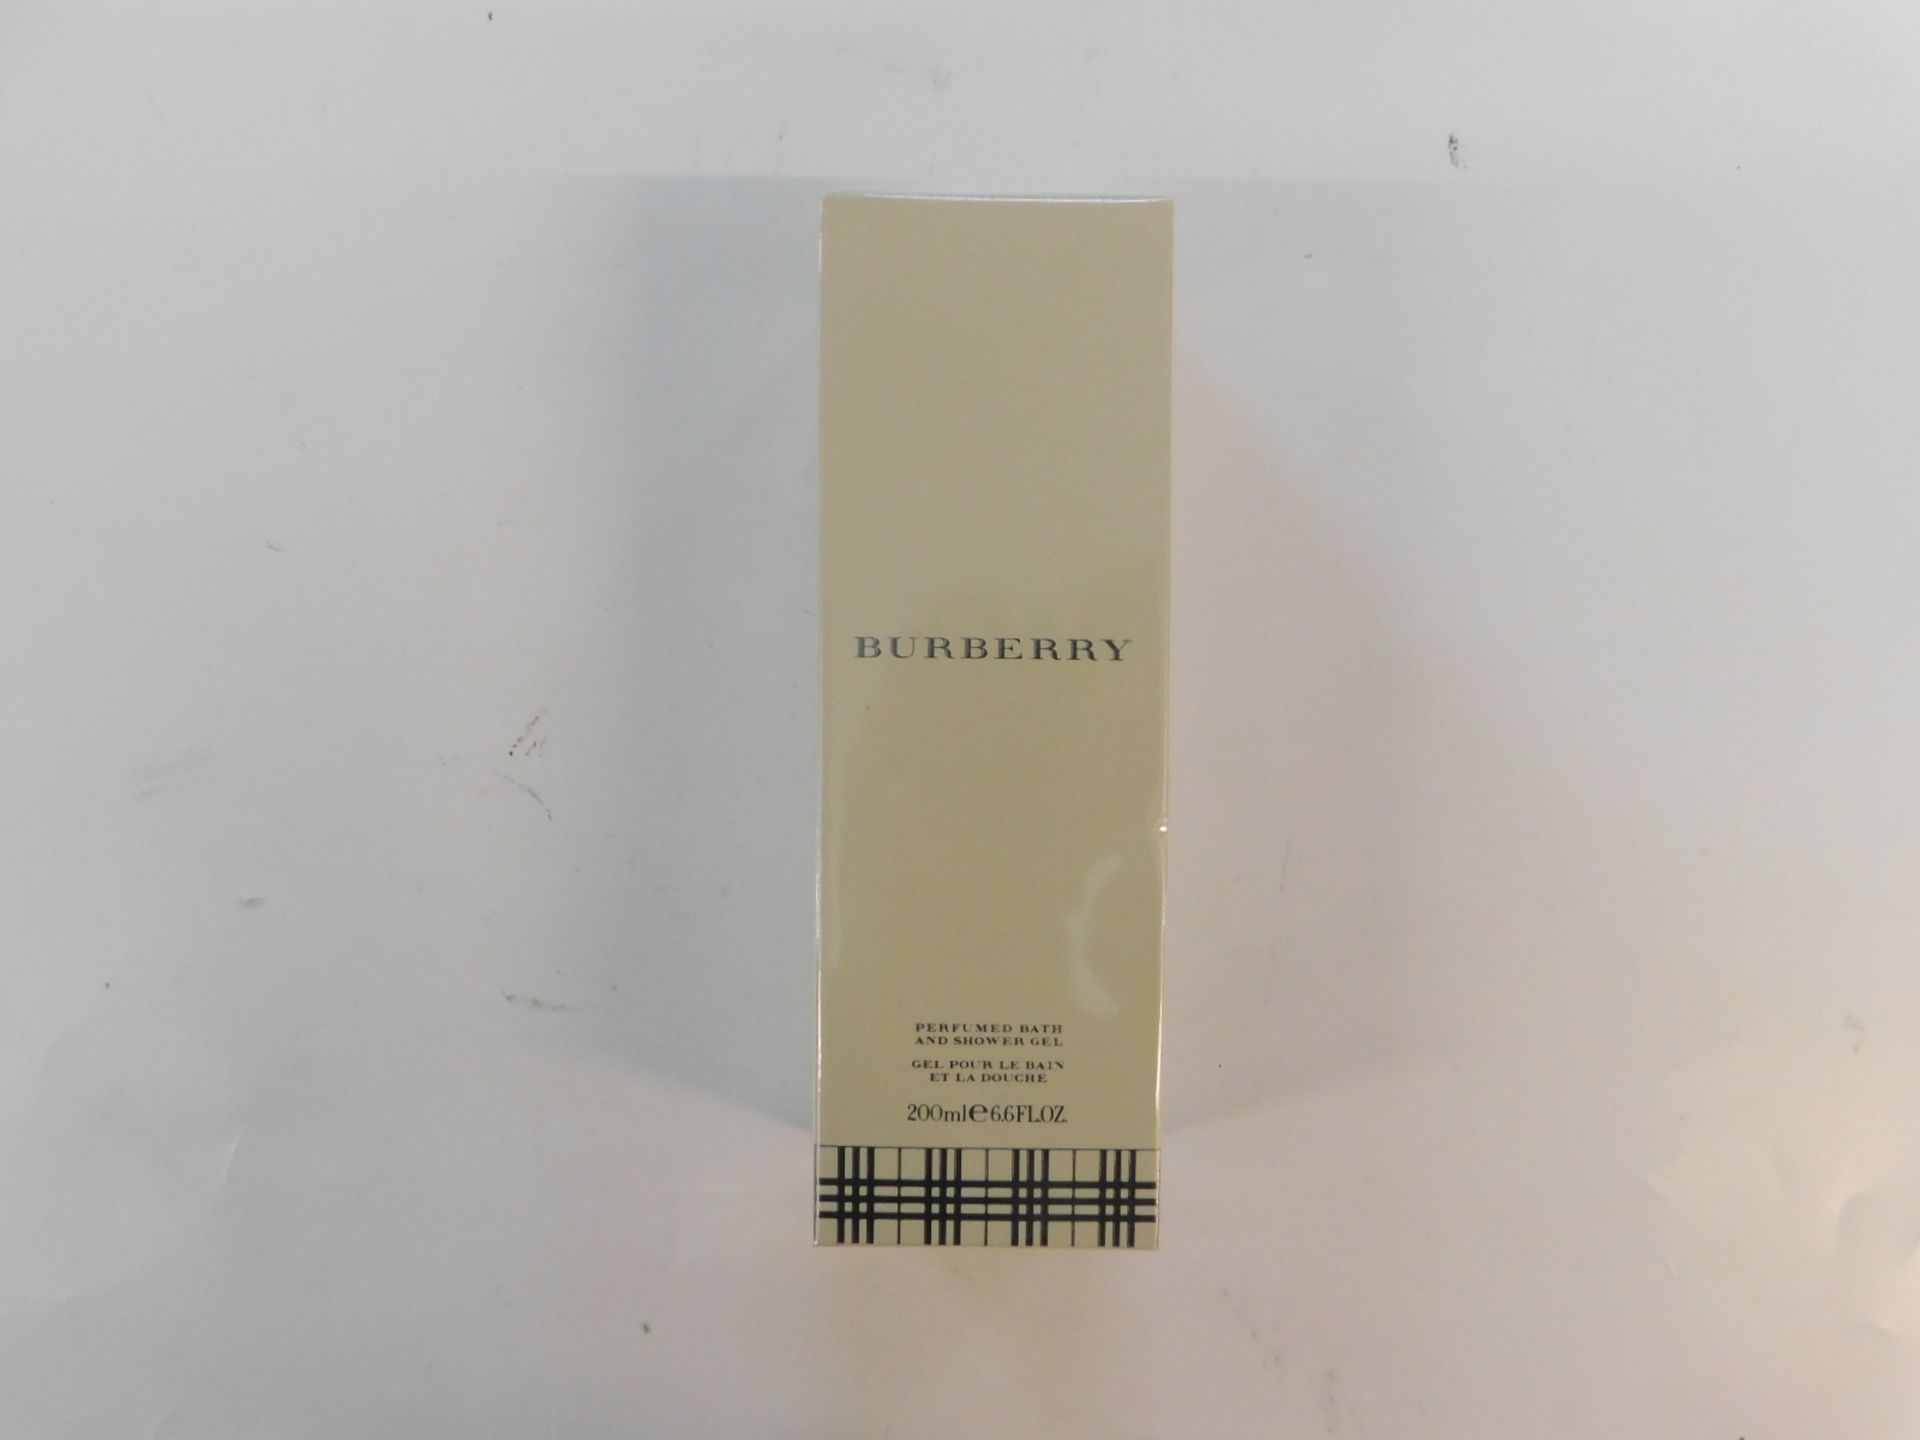 1 BRAND NEW SEALED BOXED BURBERRY PERFUMED BATH AND SHOWER GEL 200ML RRP Â£39.99